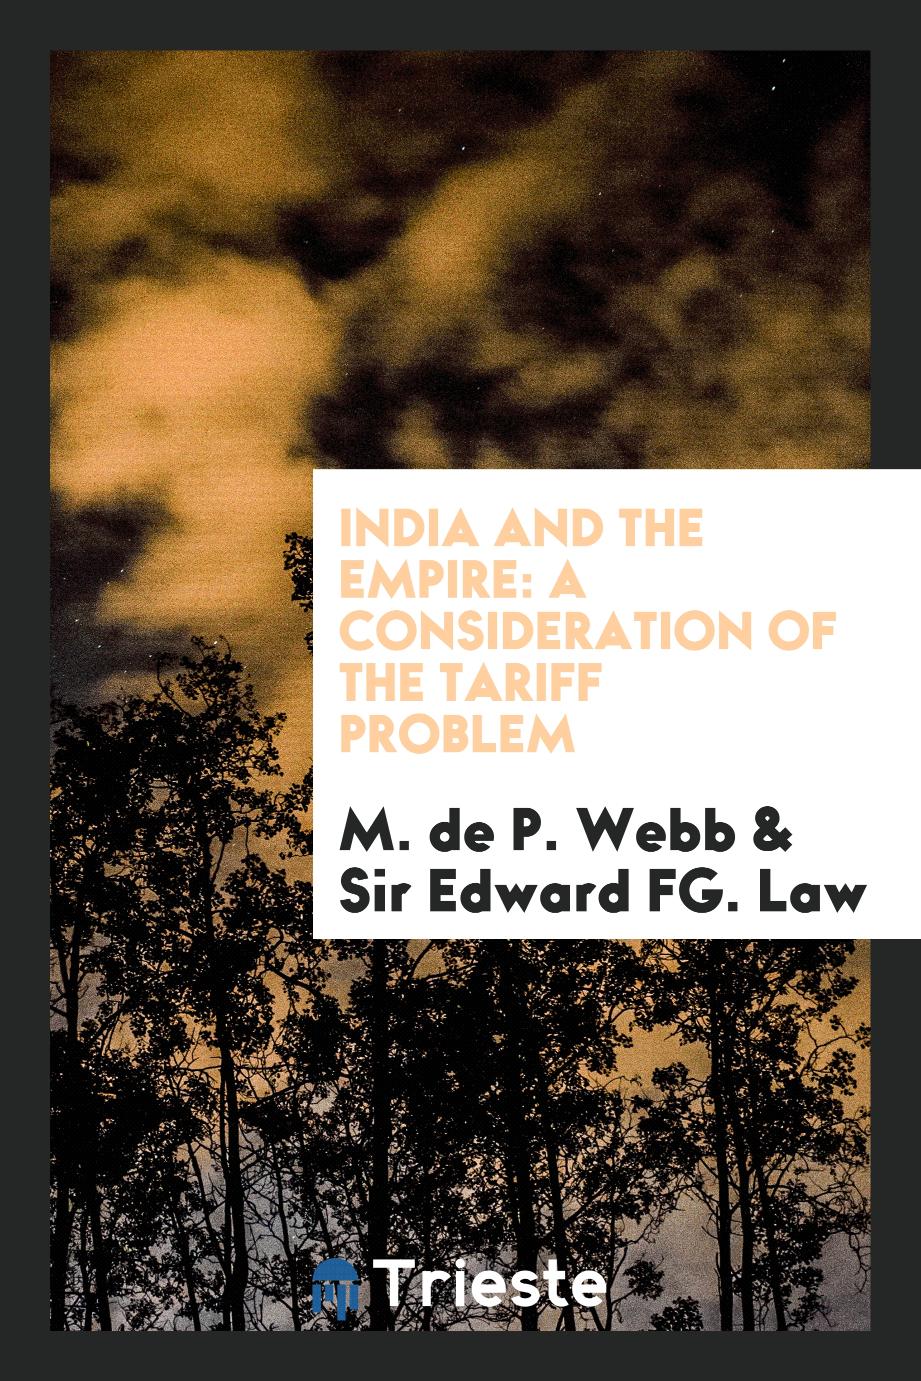 India and the Empire: A Consideration of the Tariff Problem